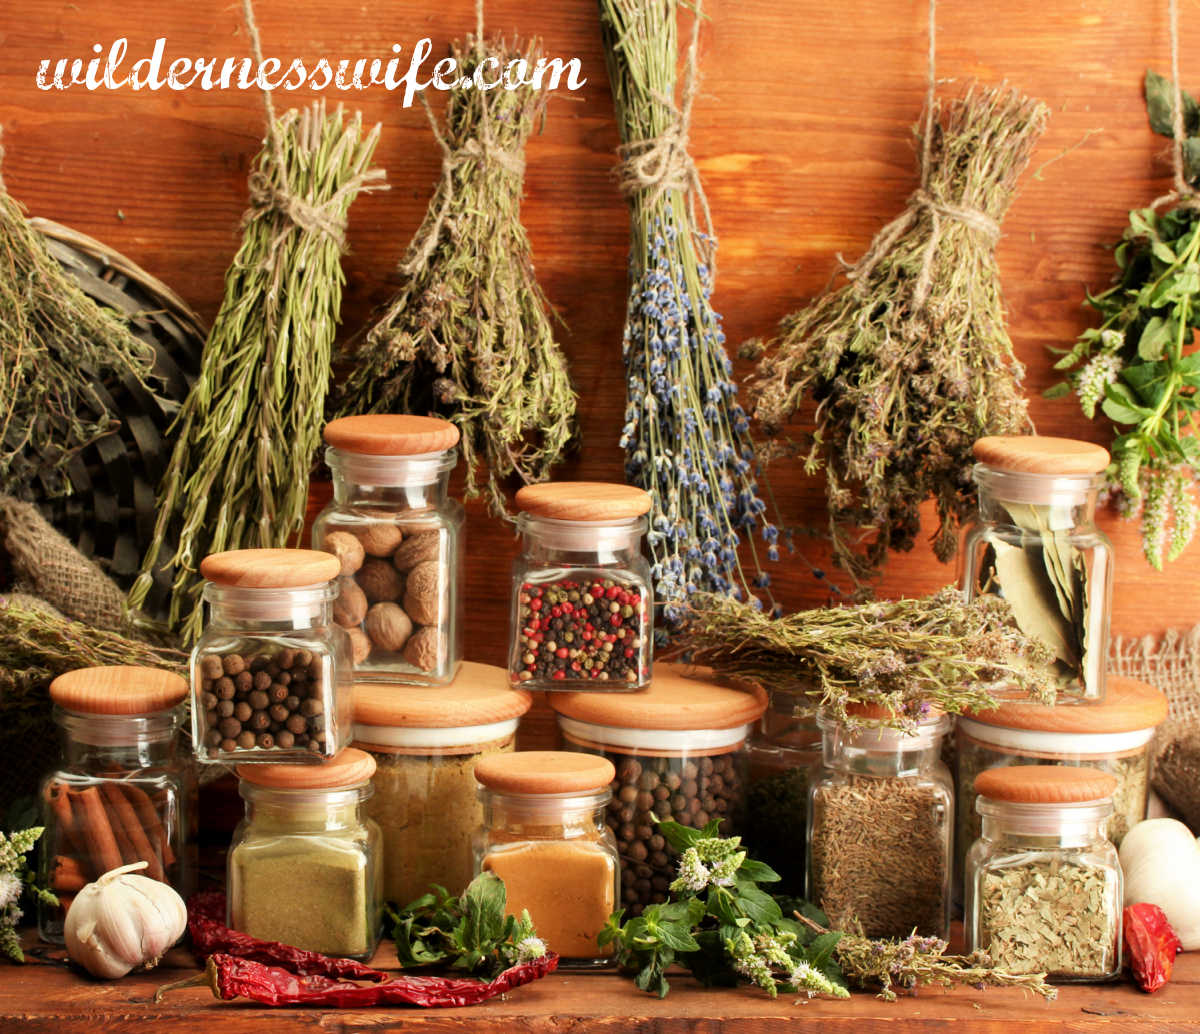 Display of dried herbs and jars of spices that can be used in making vegetable soup. They are displayed against a wood background.